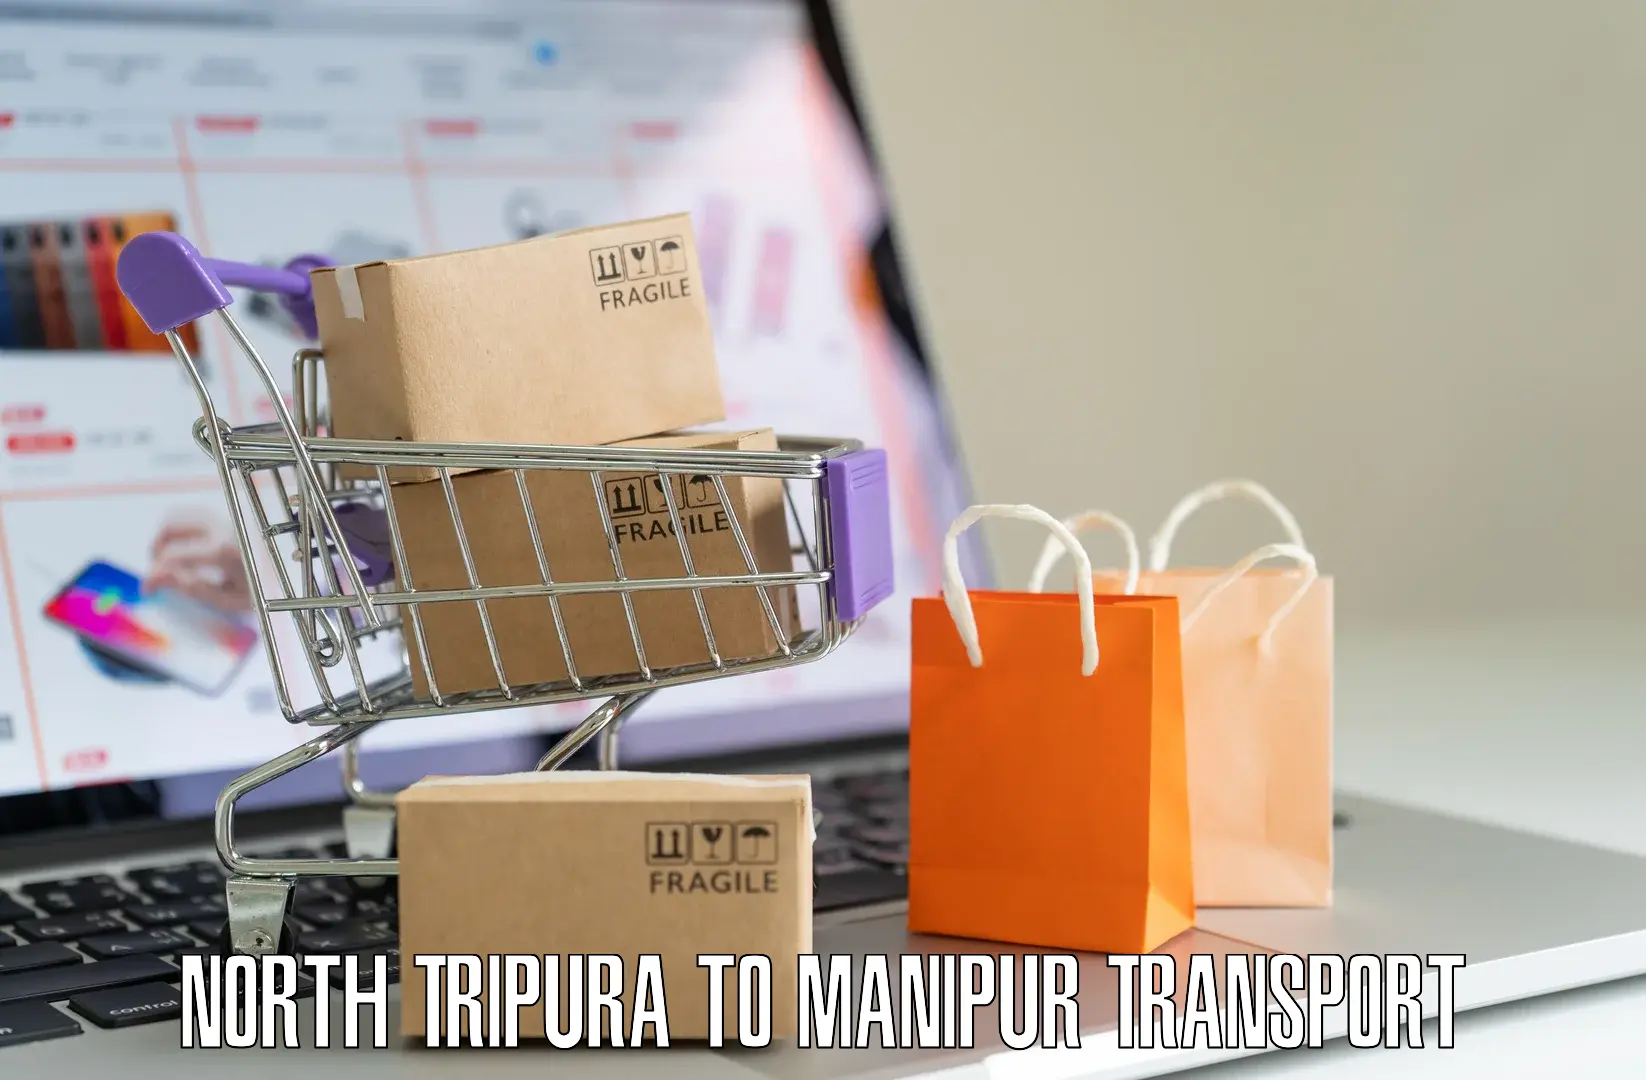 Express transport services North Tripura to Manipur